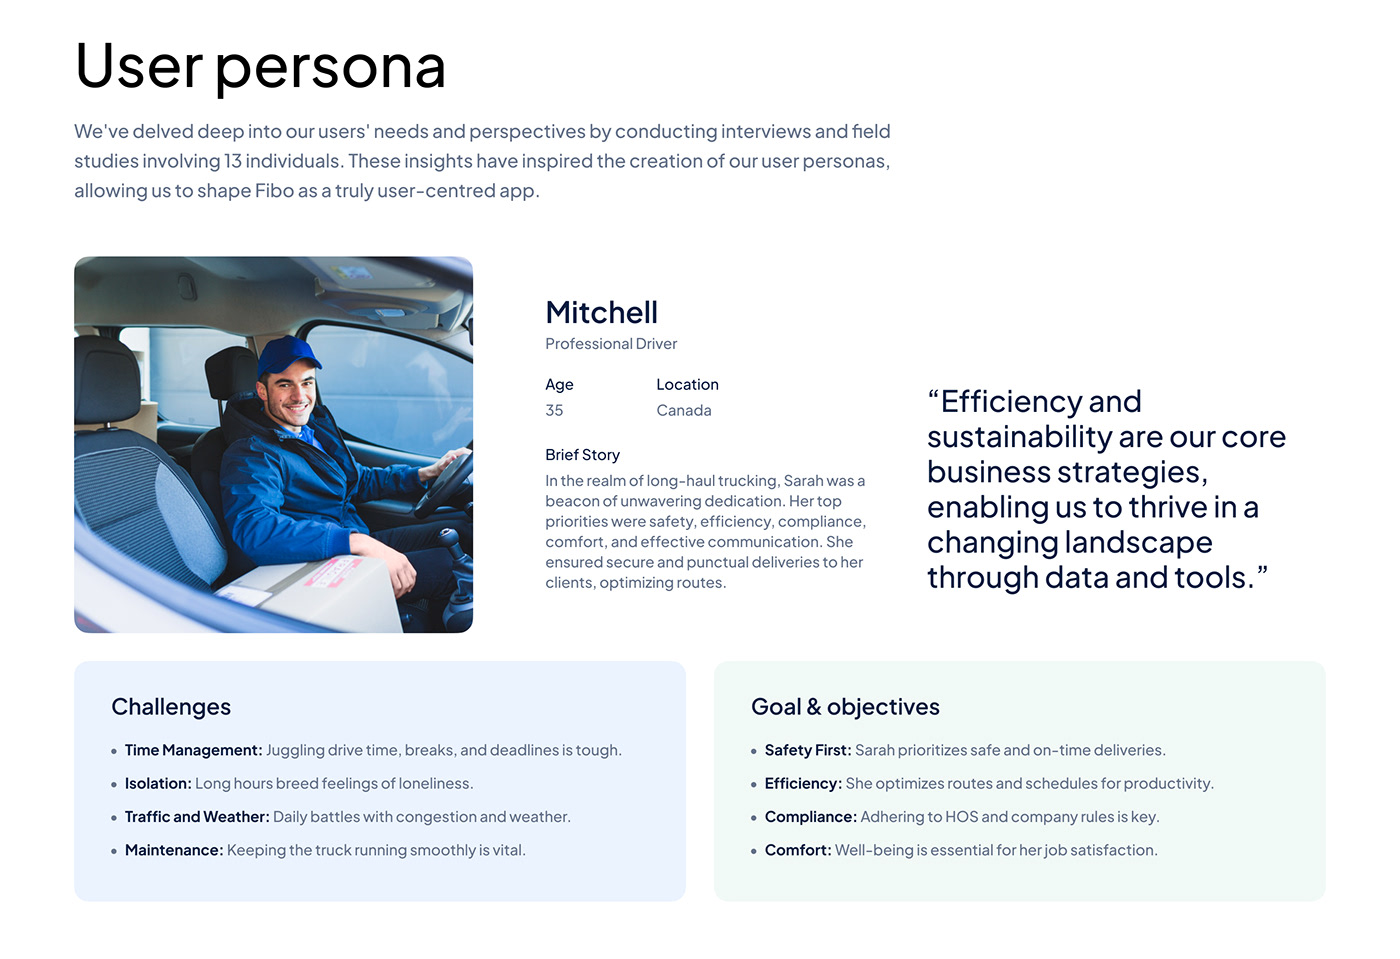 Fleet management driver app user persona from user research provides a clear vision about the users